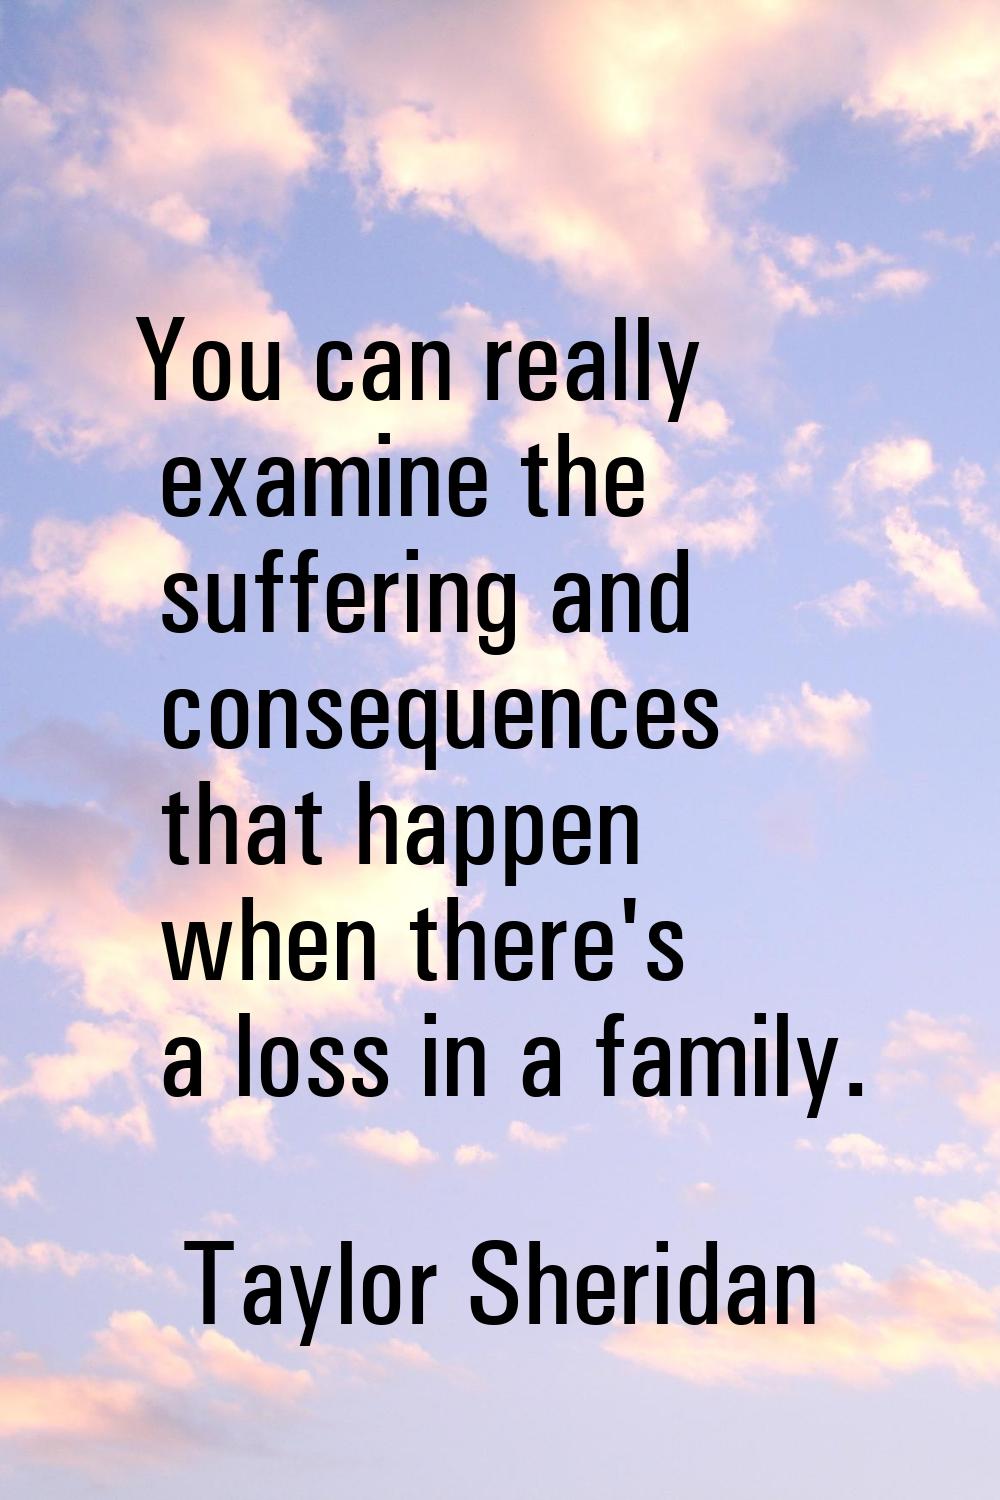 You can really examine the suffering and consequences that happen when there's a loss in a family.